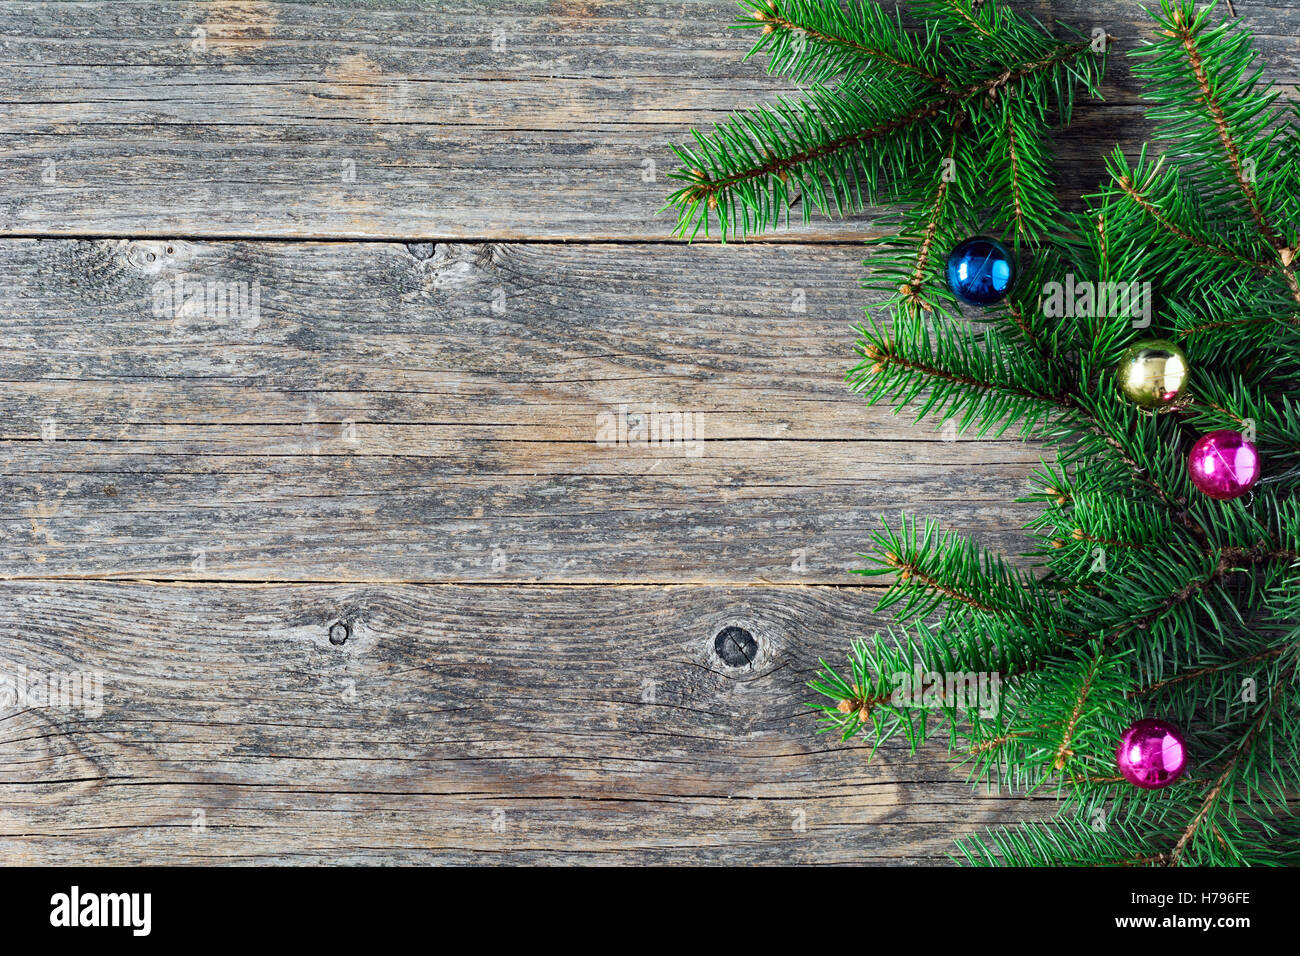 Christmas background: Wooden background with Christmas fir tree and colorful balls. Copy space for text. New year,Christmas card Stock Photo